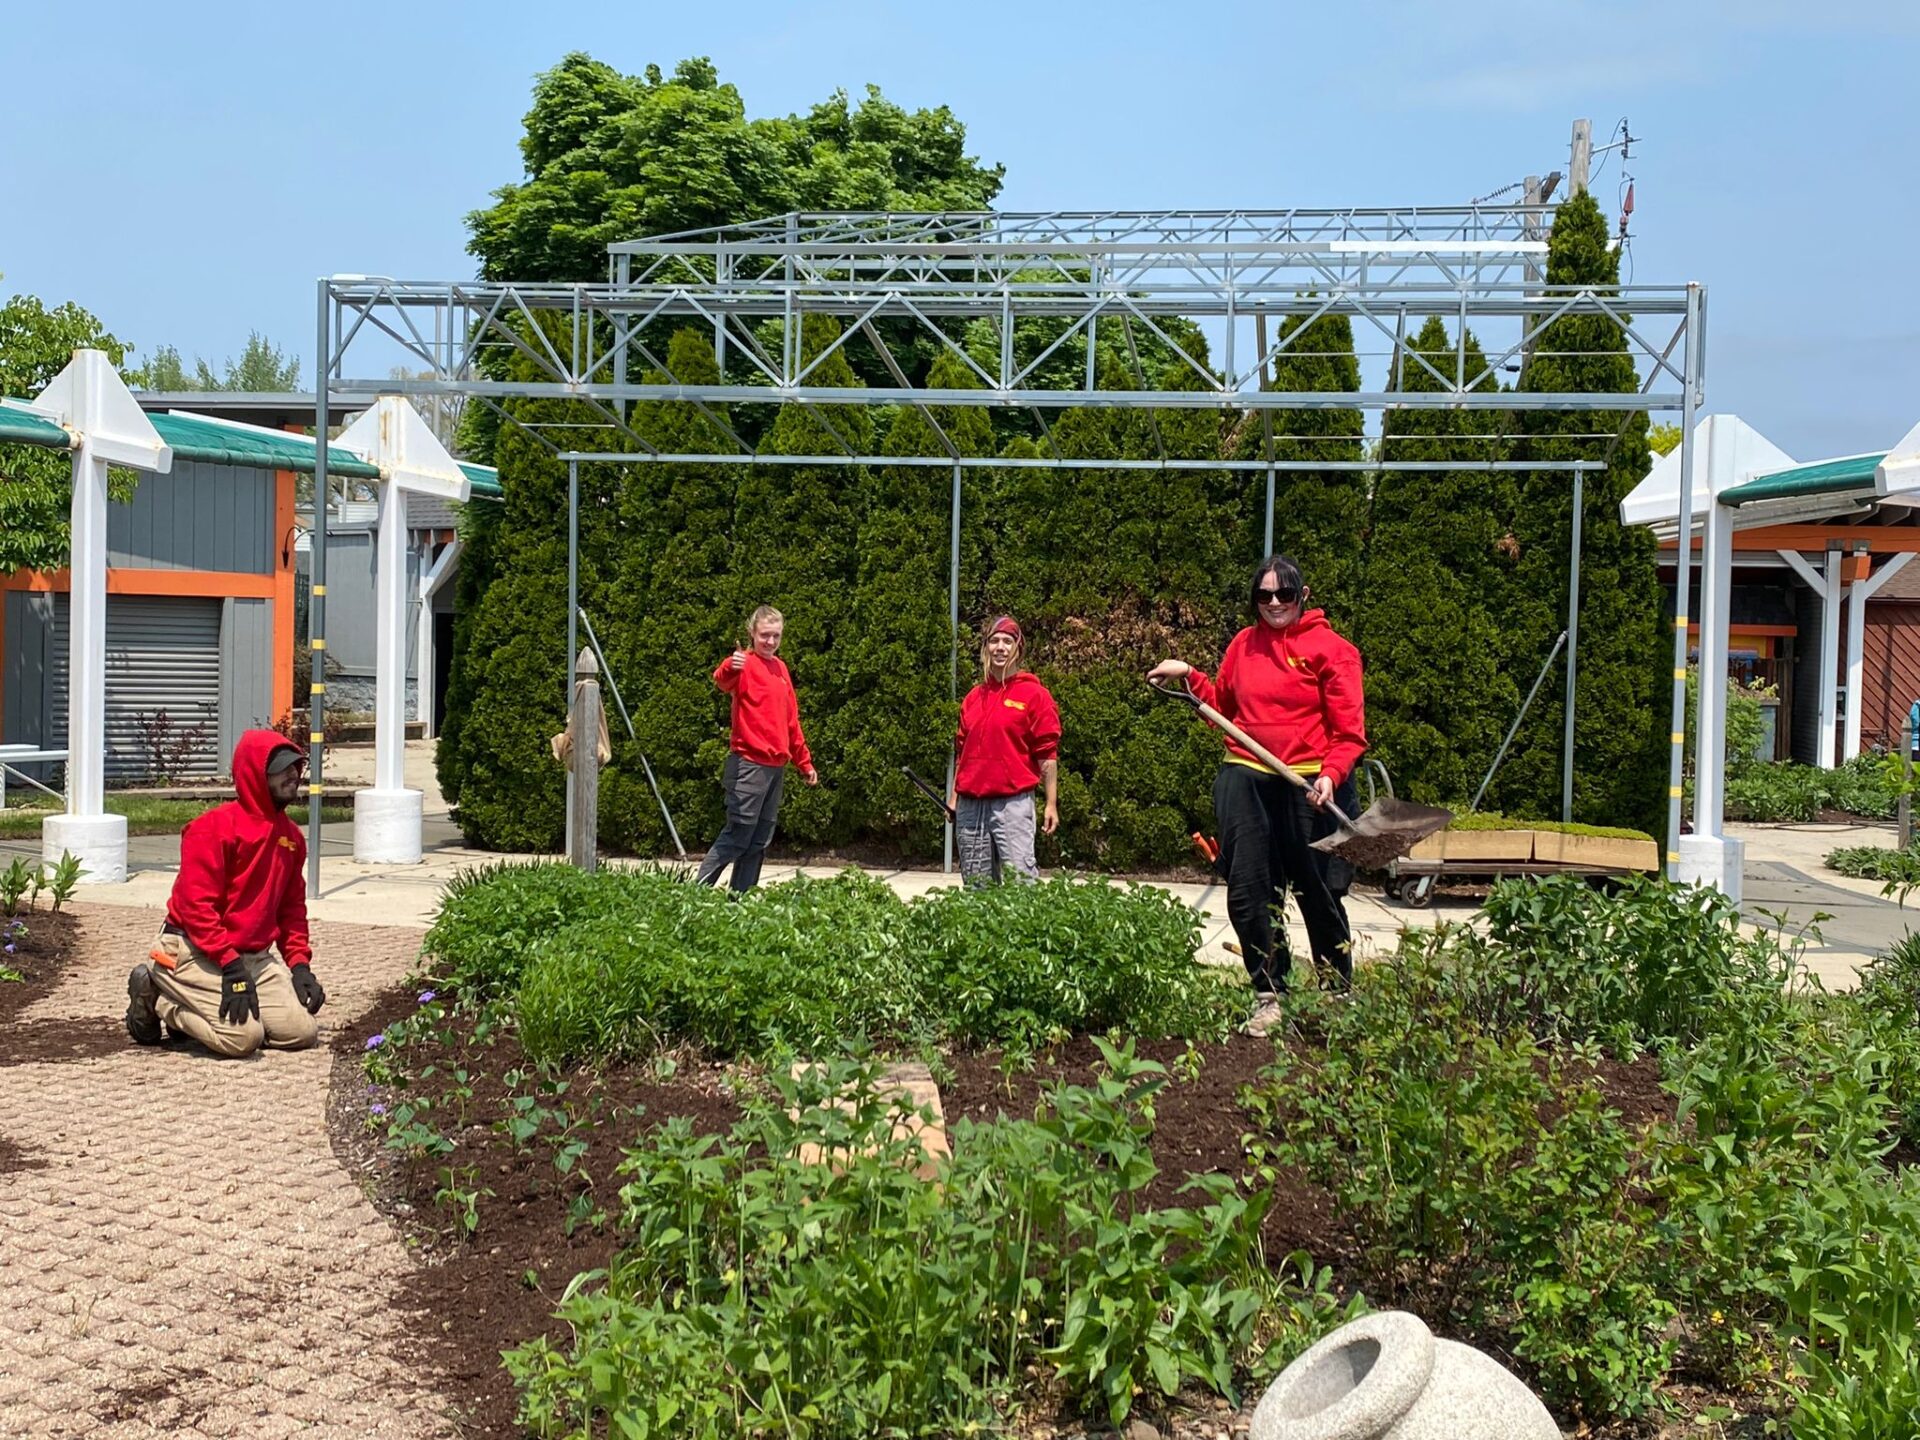 Five people in red shirts are engaged in gardening tasks, planting and maintaining a landscaped area with a metal structure in the background.